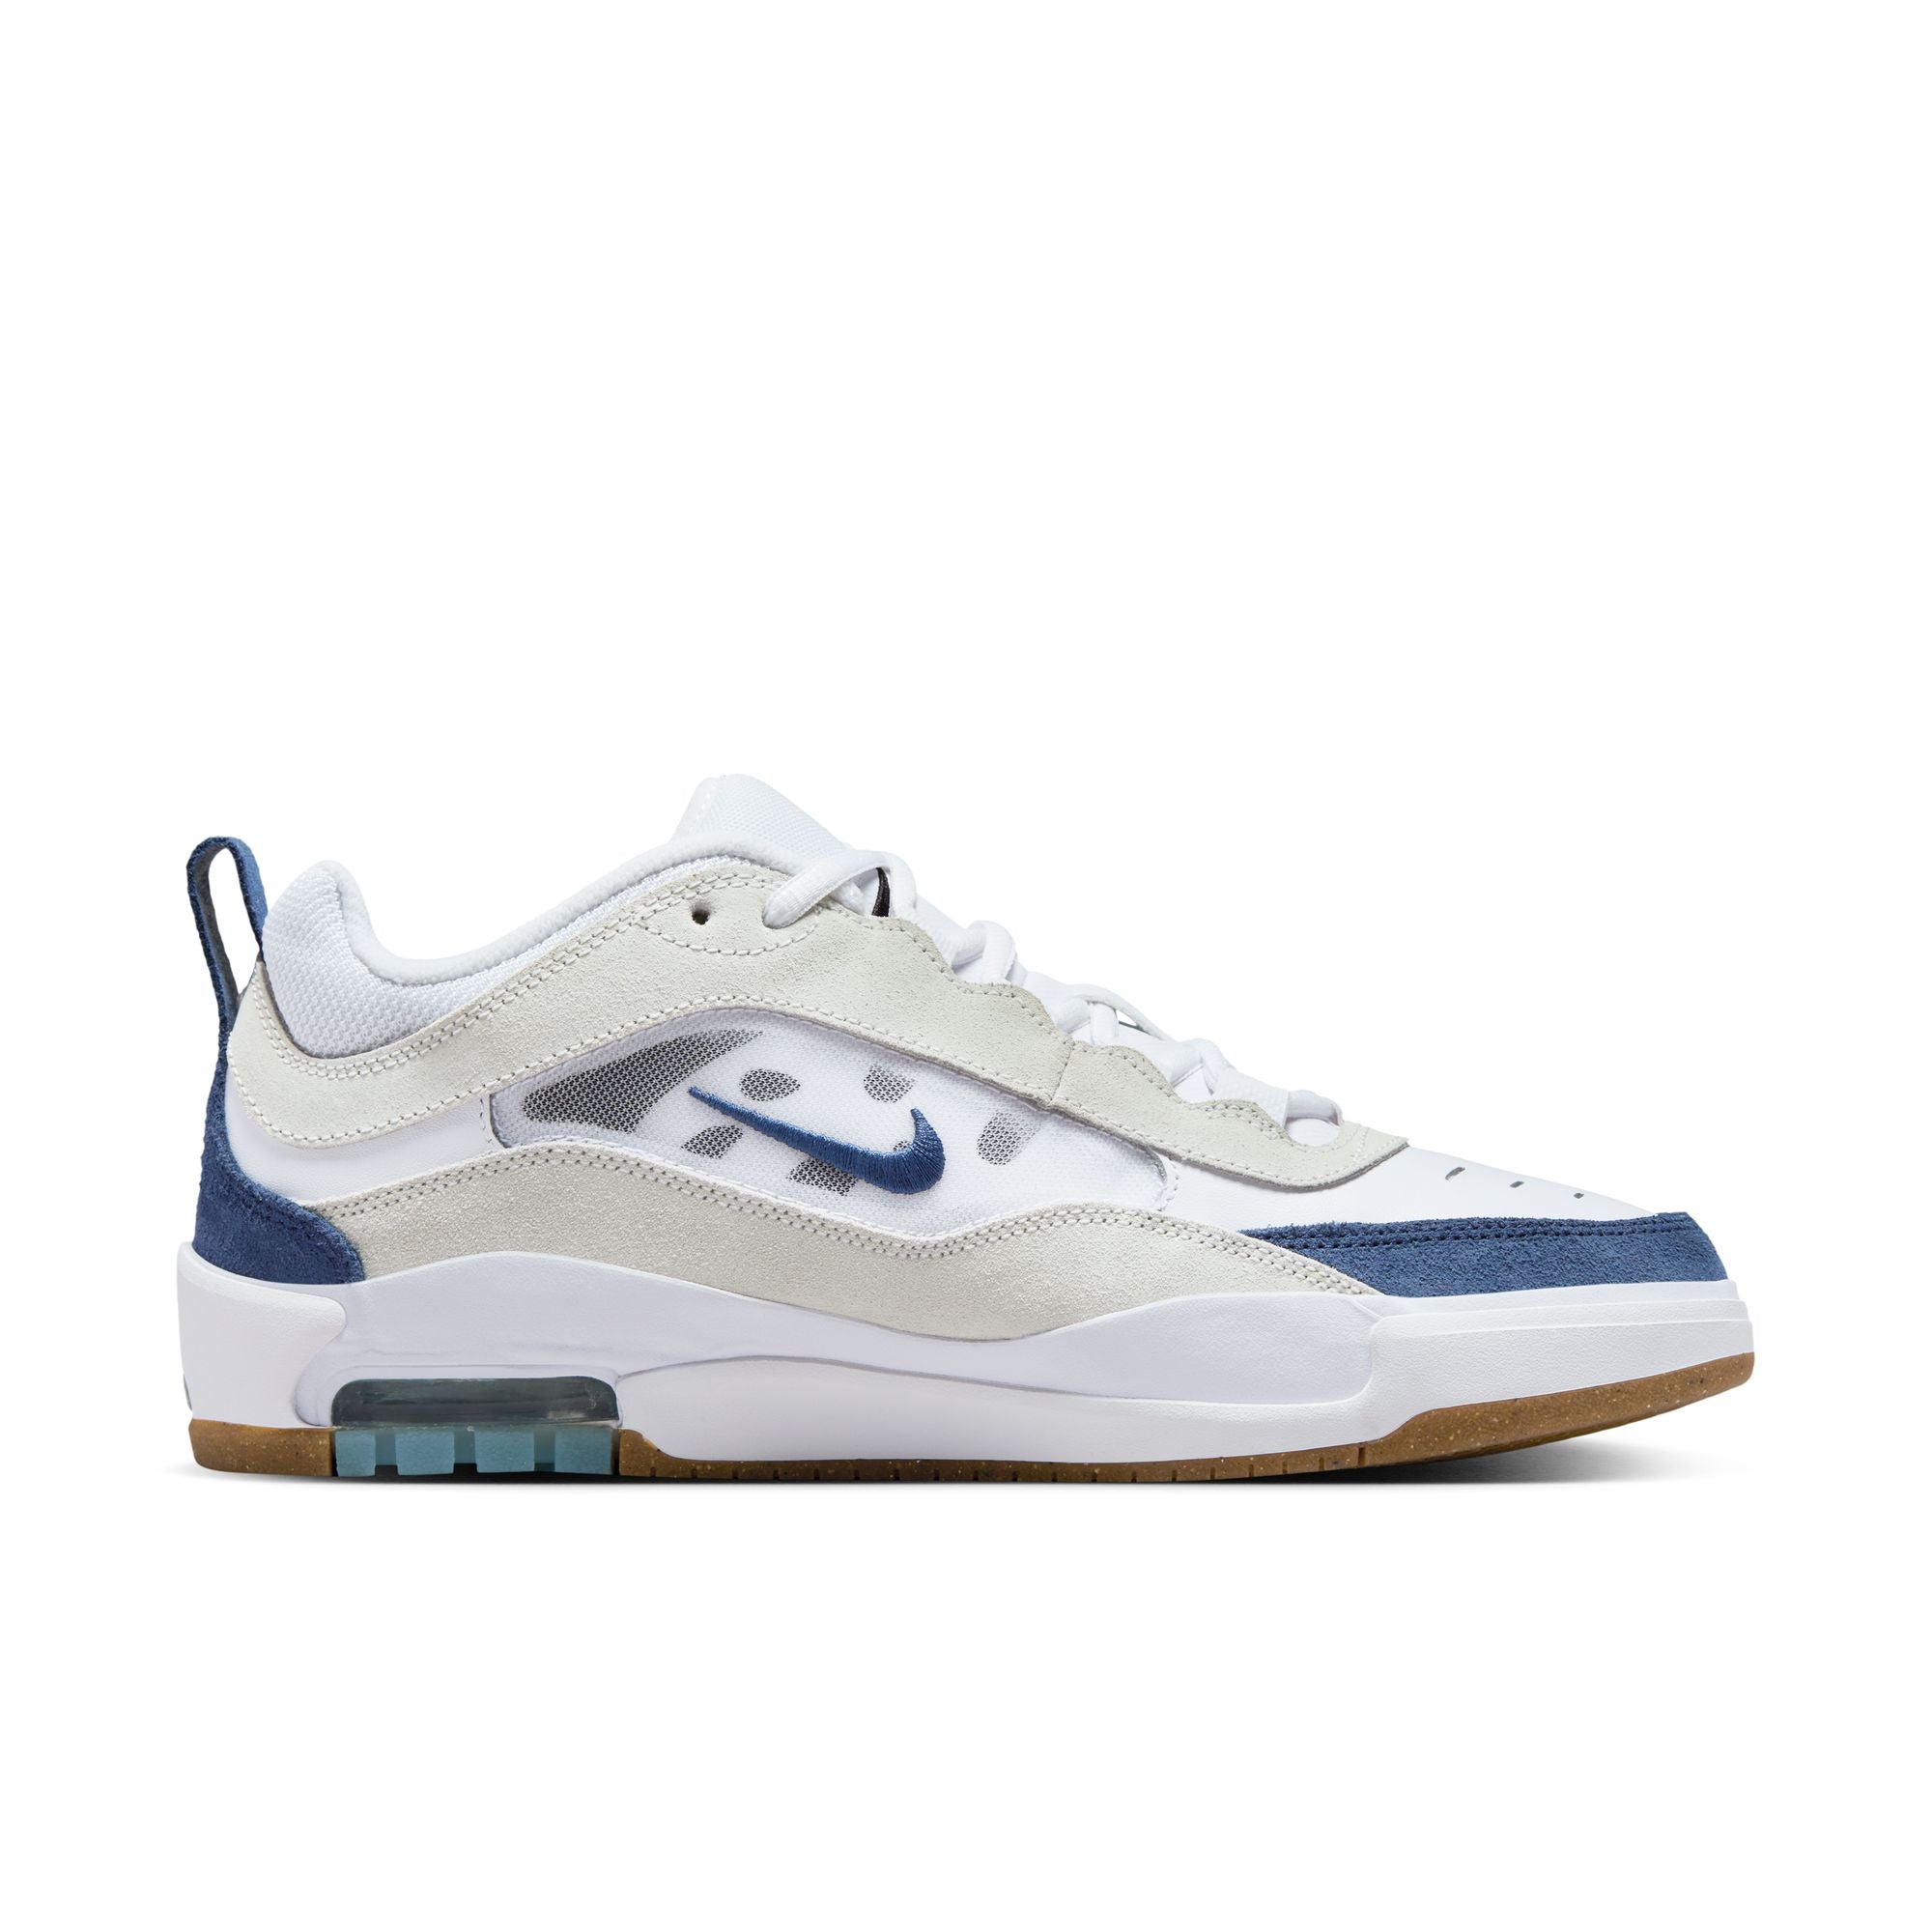 White nike air max Ishod low top shoe with cream and blue suede details and black nike tick. Gum sole. Free uk shipping over £50